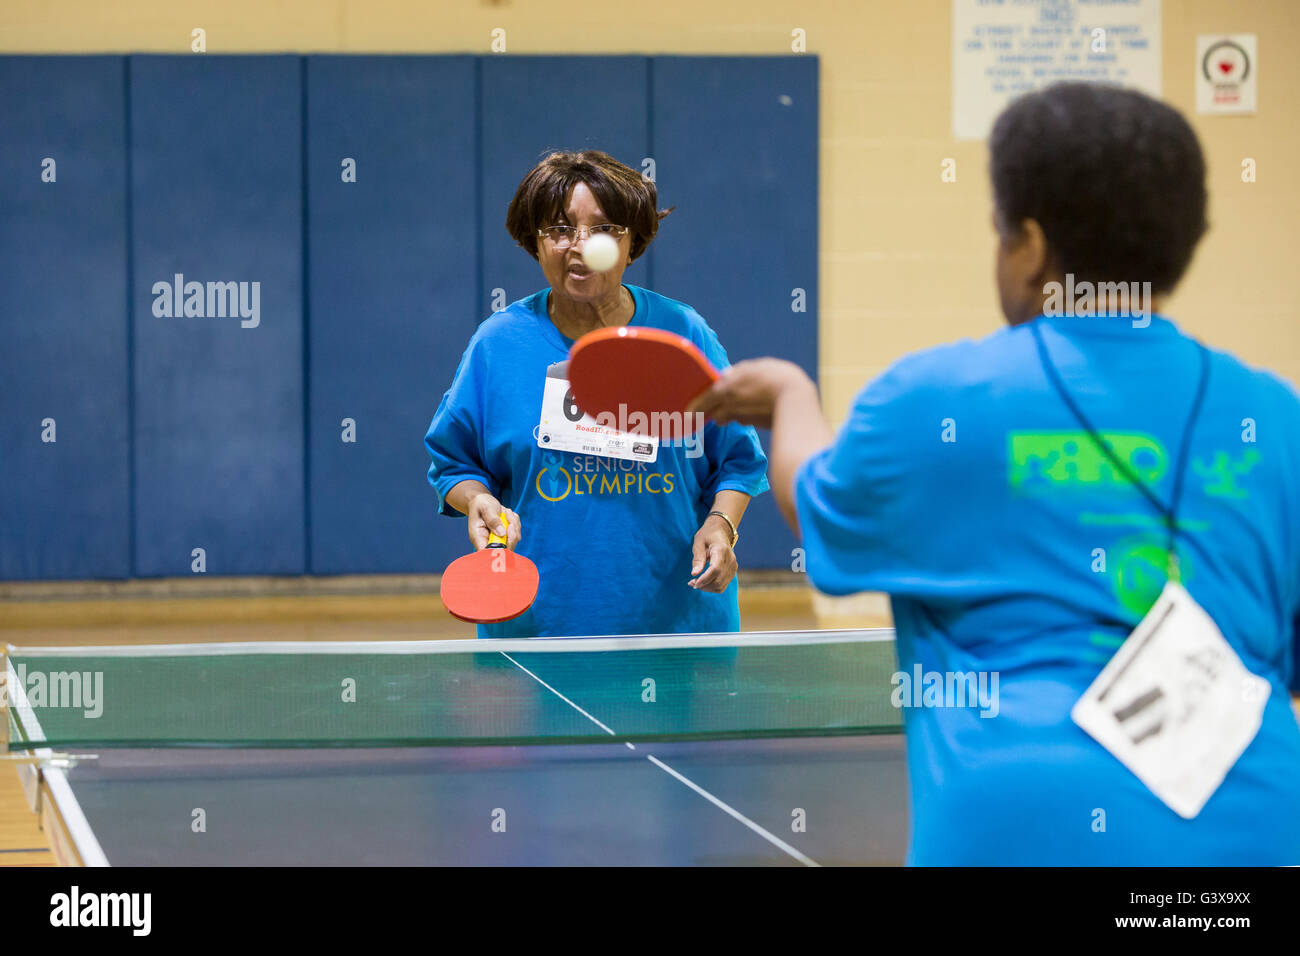 Detroit, Michigan - Table tennis competition at the Detroit Recreation Department's Senior Olympics. Stock Photo